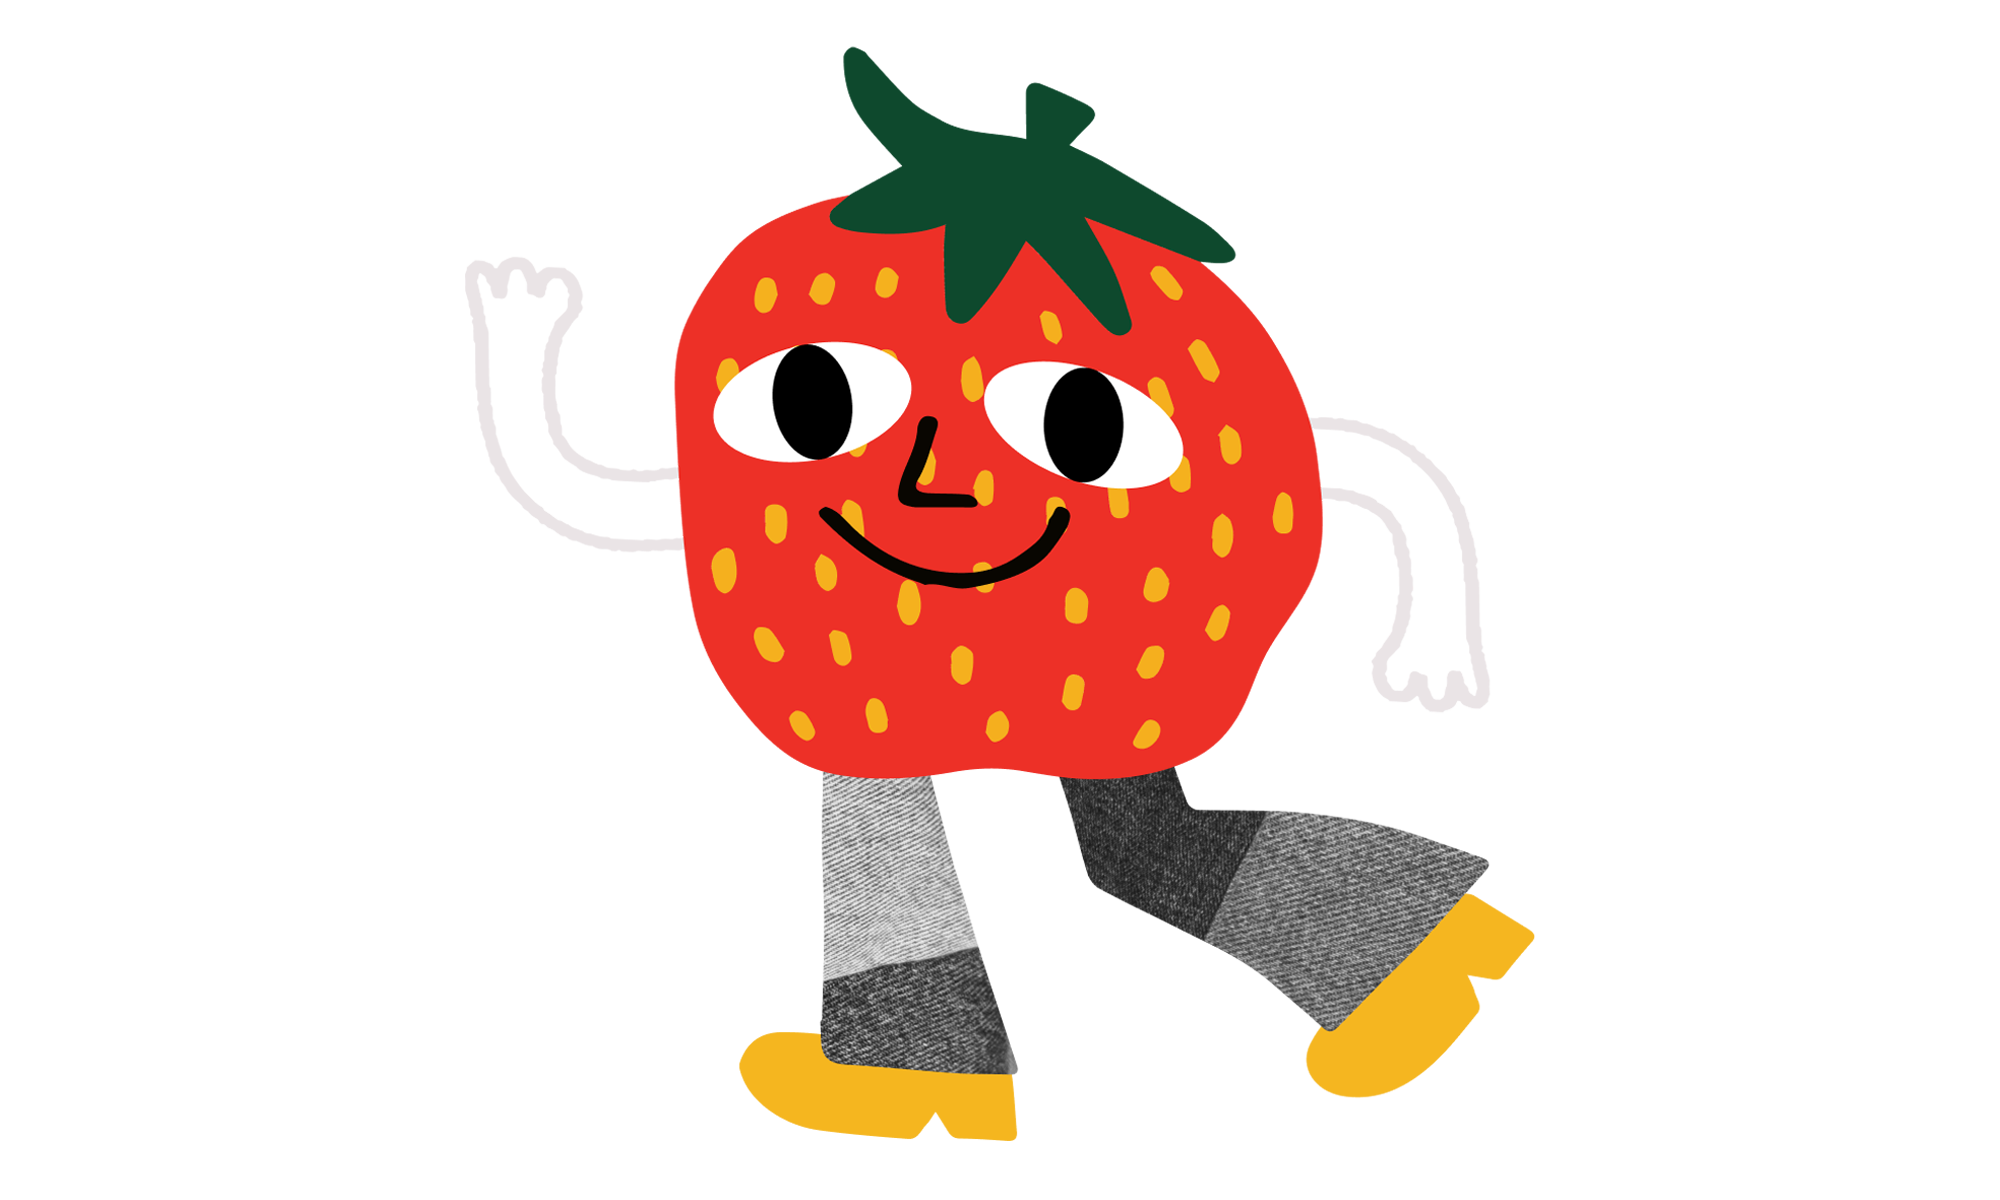 Cute strawberry graphic with arms and legs, smiling at the camera. The LUIGI'S strawberry has an arm raised, waving at the camera and taking a step to the left.